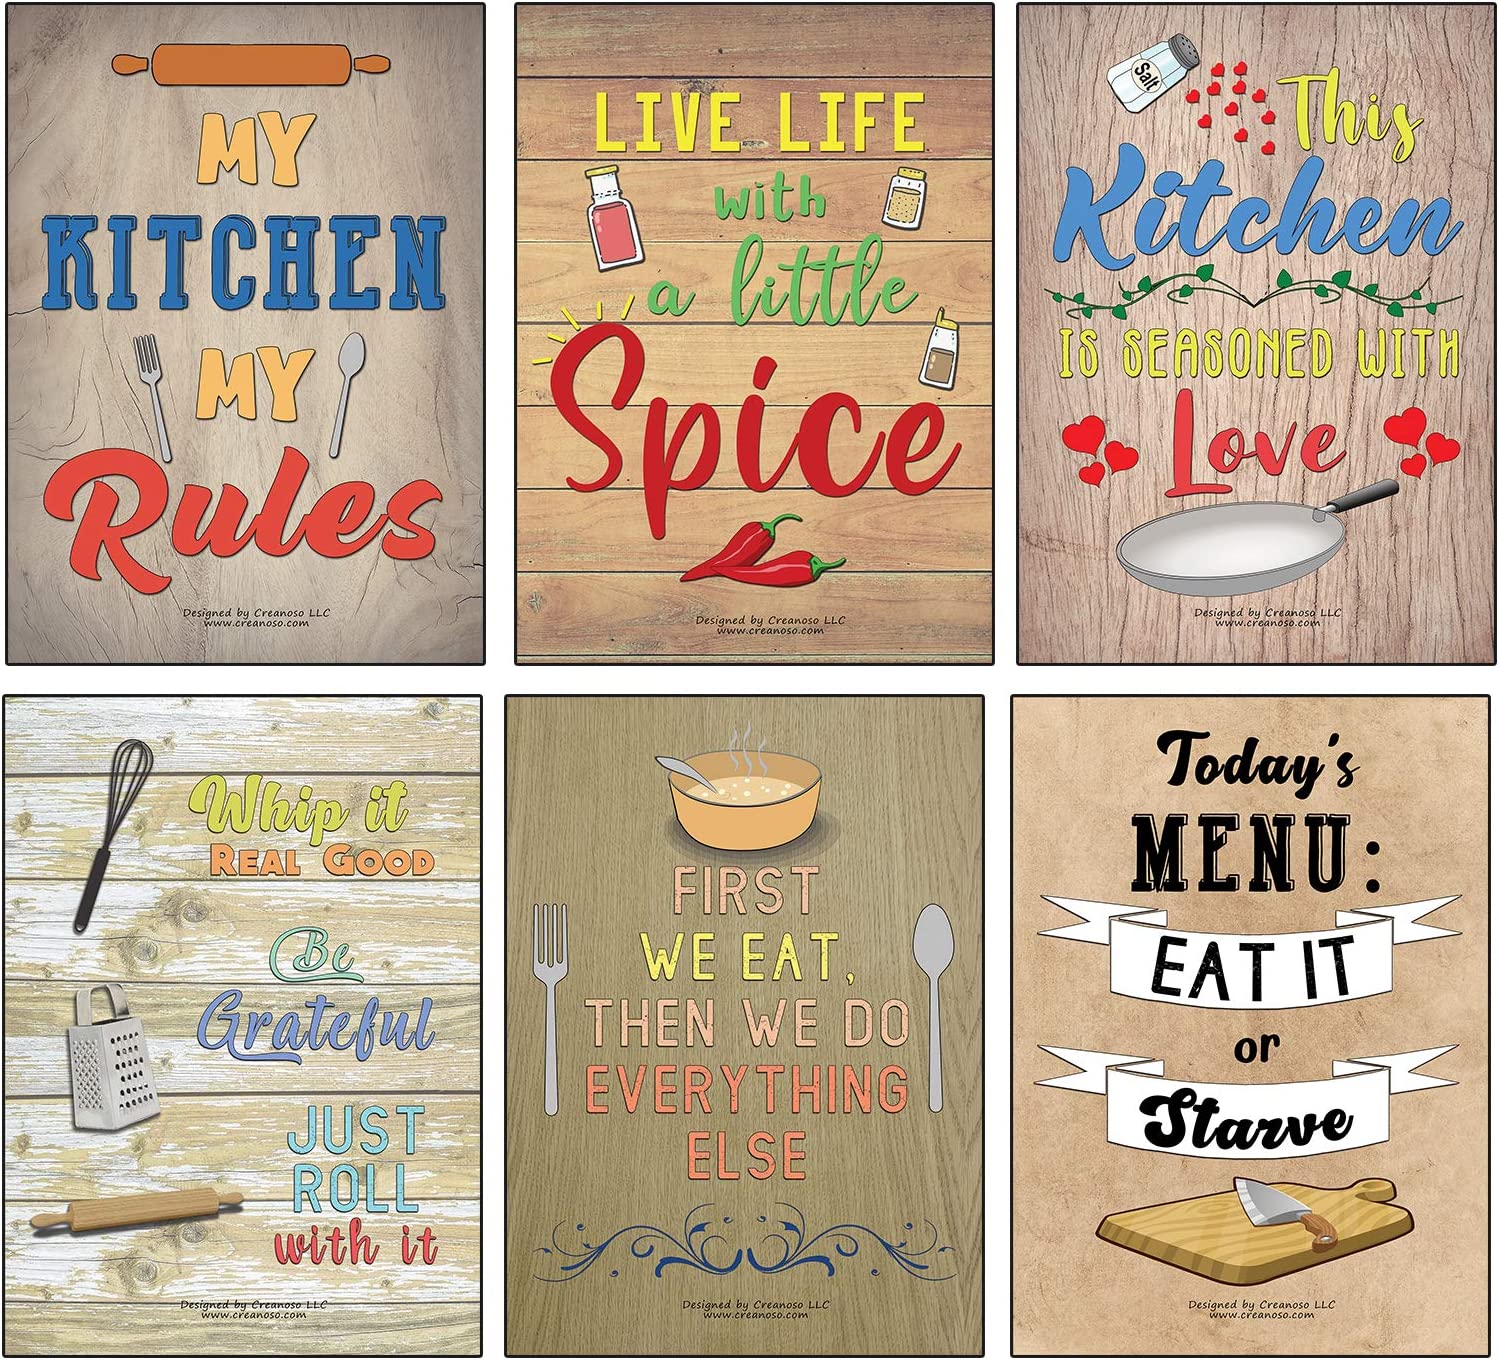 Creanoso Kitchen Quotes and Sayings Poster Prints (24-Pack) - Stocking Stuffers Gifts for Men Women Professionals Adults â€“ Cool Wall Art Decal DÃ©cor for Home Office Classroom Storage Room â€“ Great for Wall Hanging